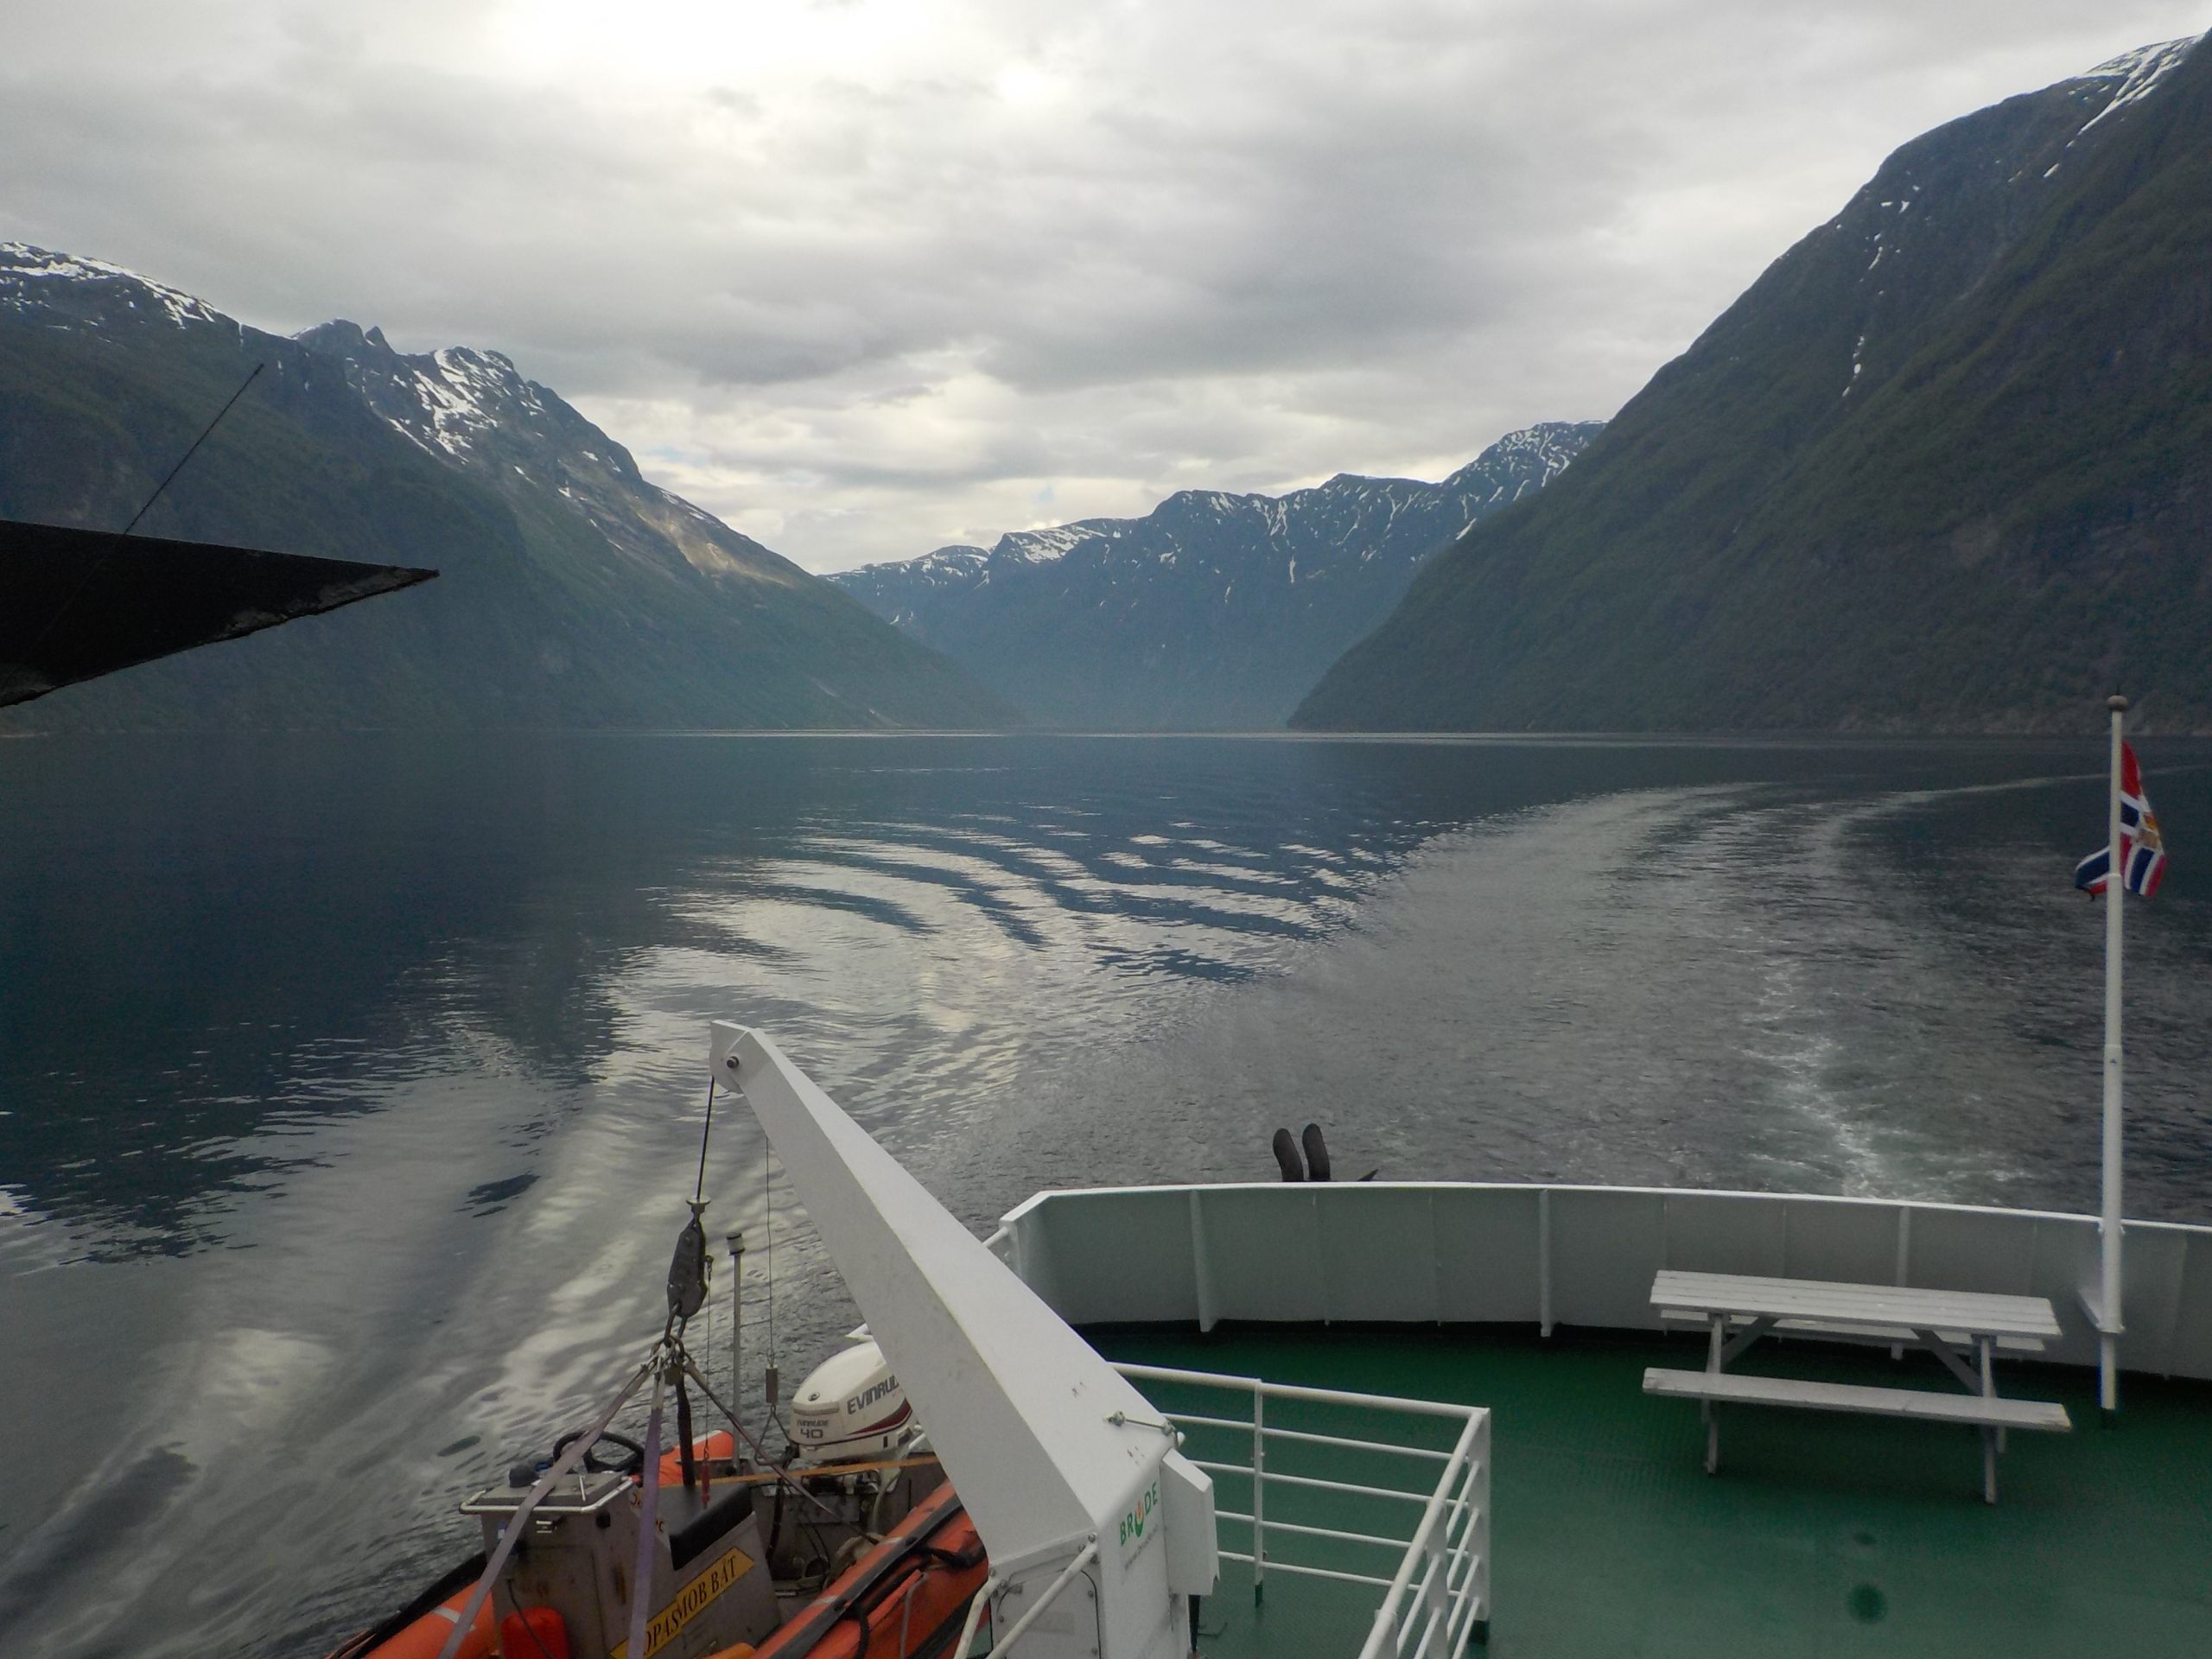 Turning out of Geirangerfjord